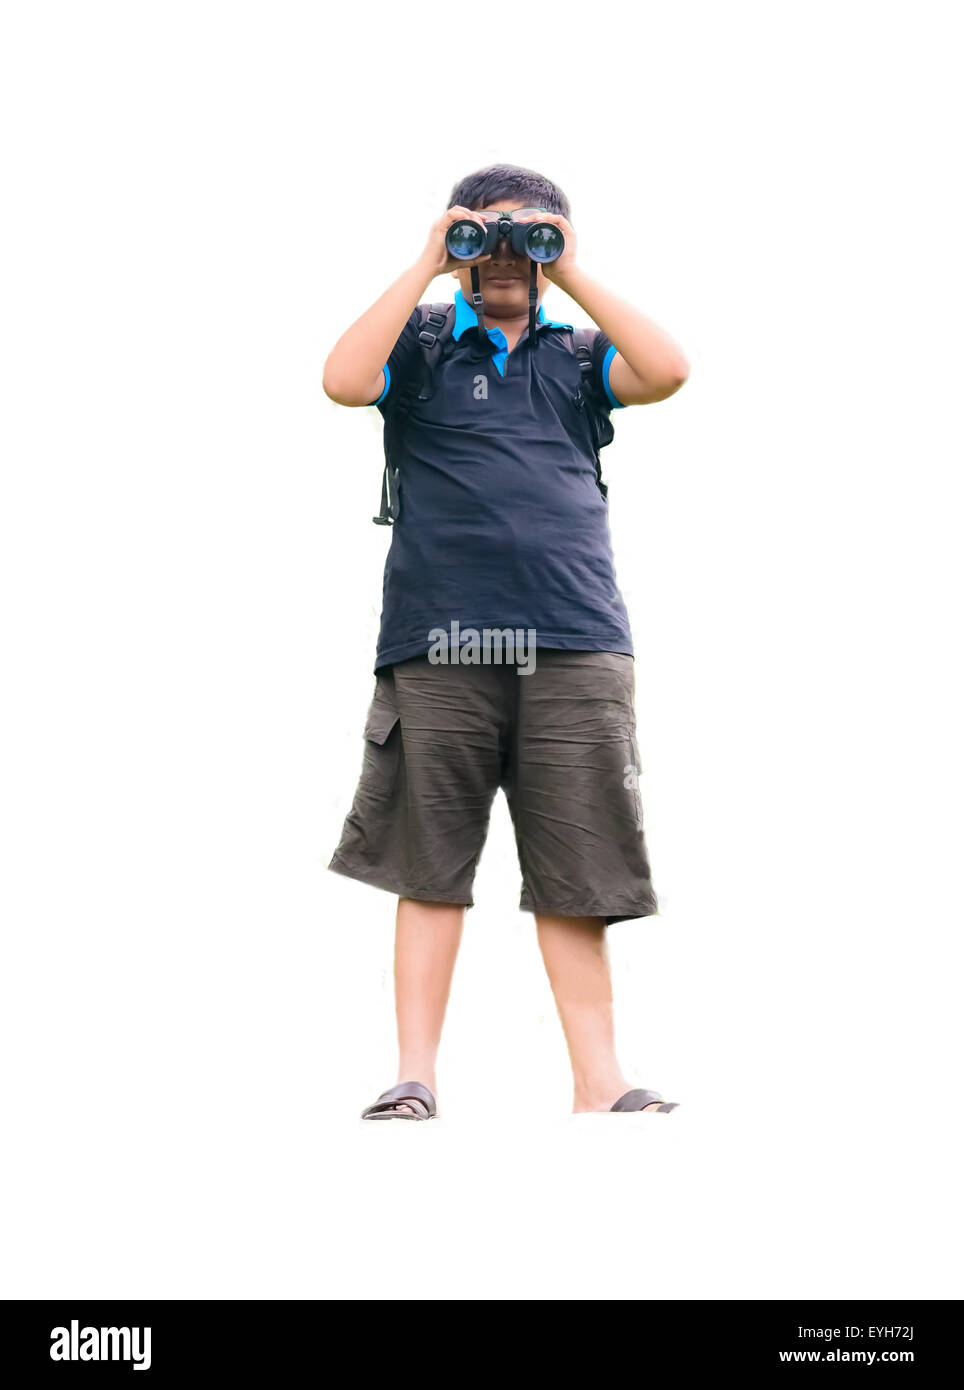 A young boy watching through binoculars with copy space and isolated on white showing hobby related scientific activity Stock Photo